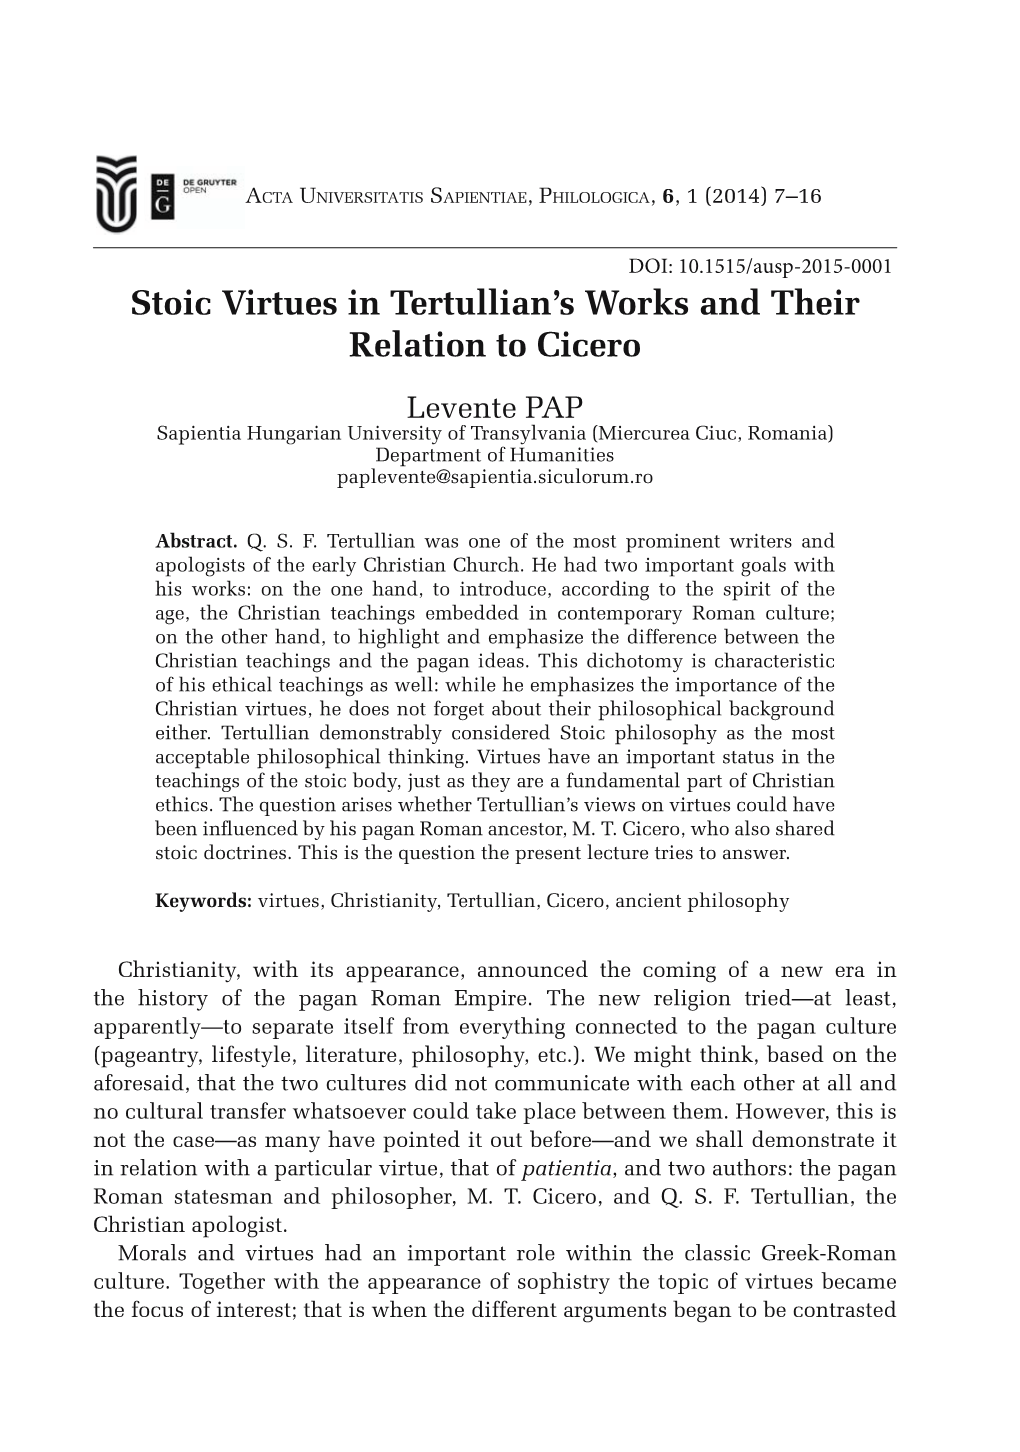 Stoic Virtues in Tertullian's Works and Their Relation to Cicero